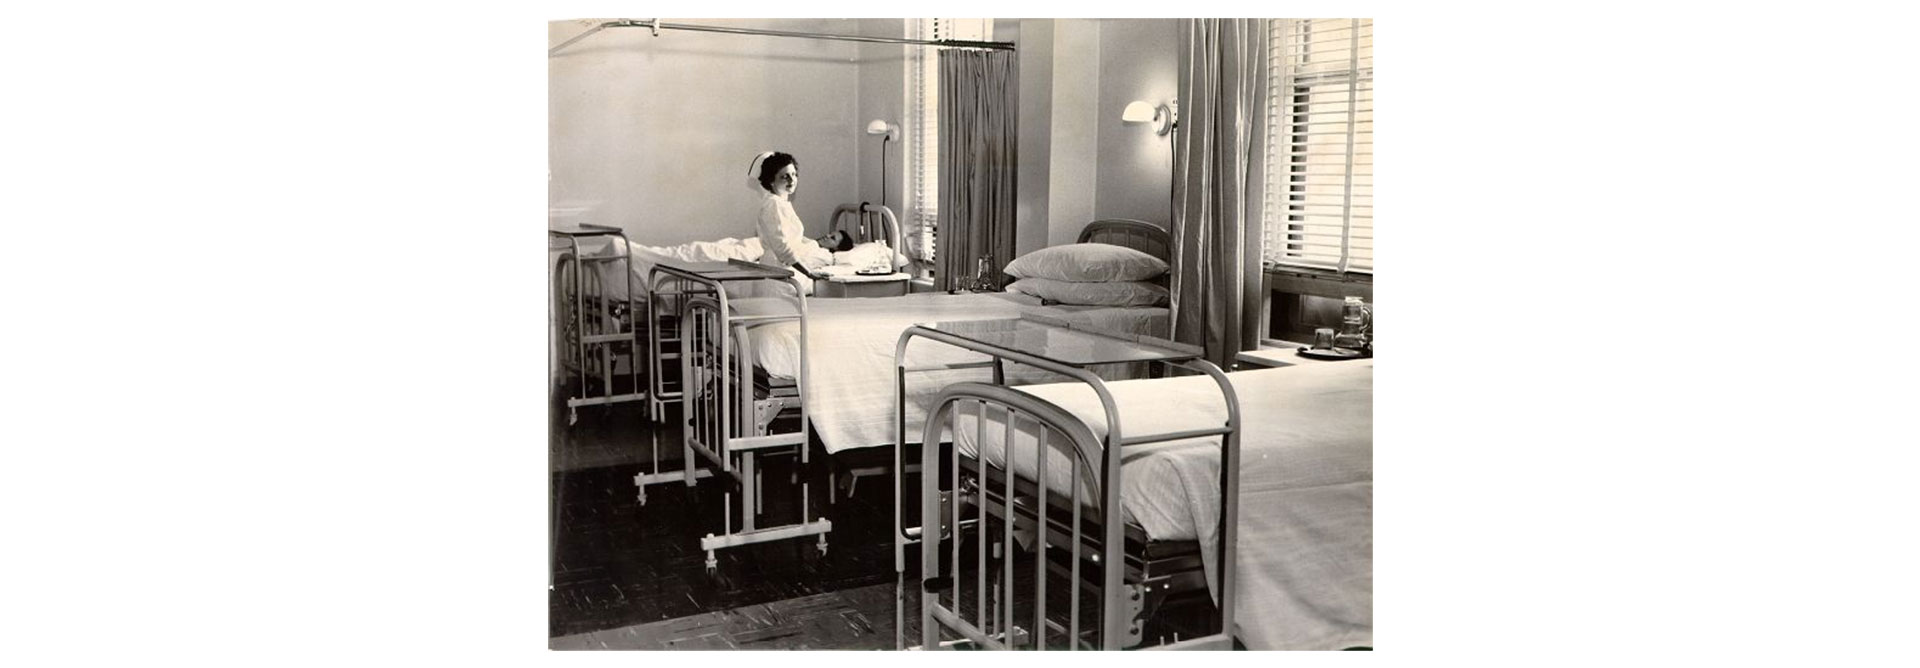 In the foreground, three empty hospital beds are lined up against a wall.  Near the last bed is a nurse in an old-fashioned uniform